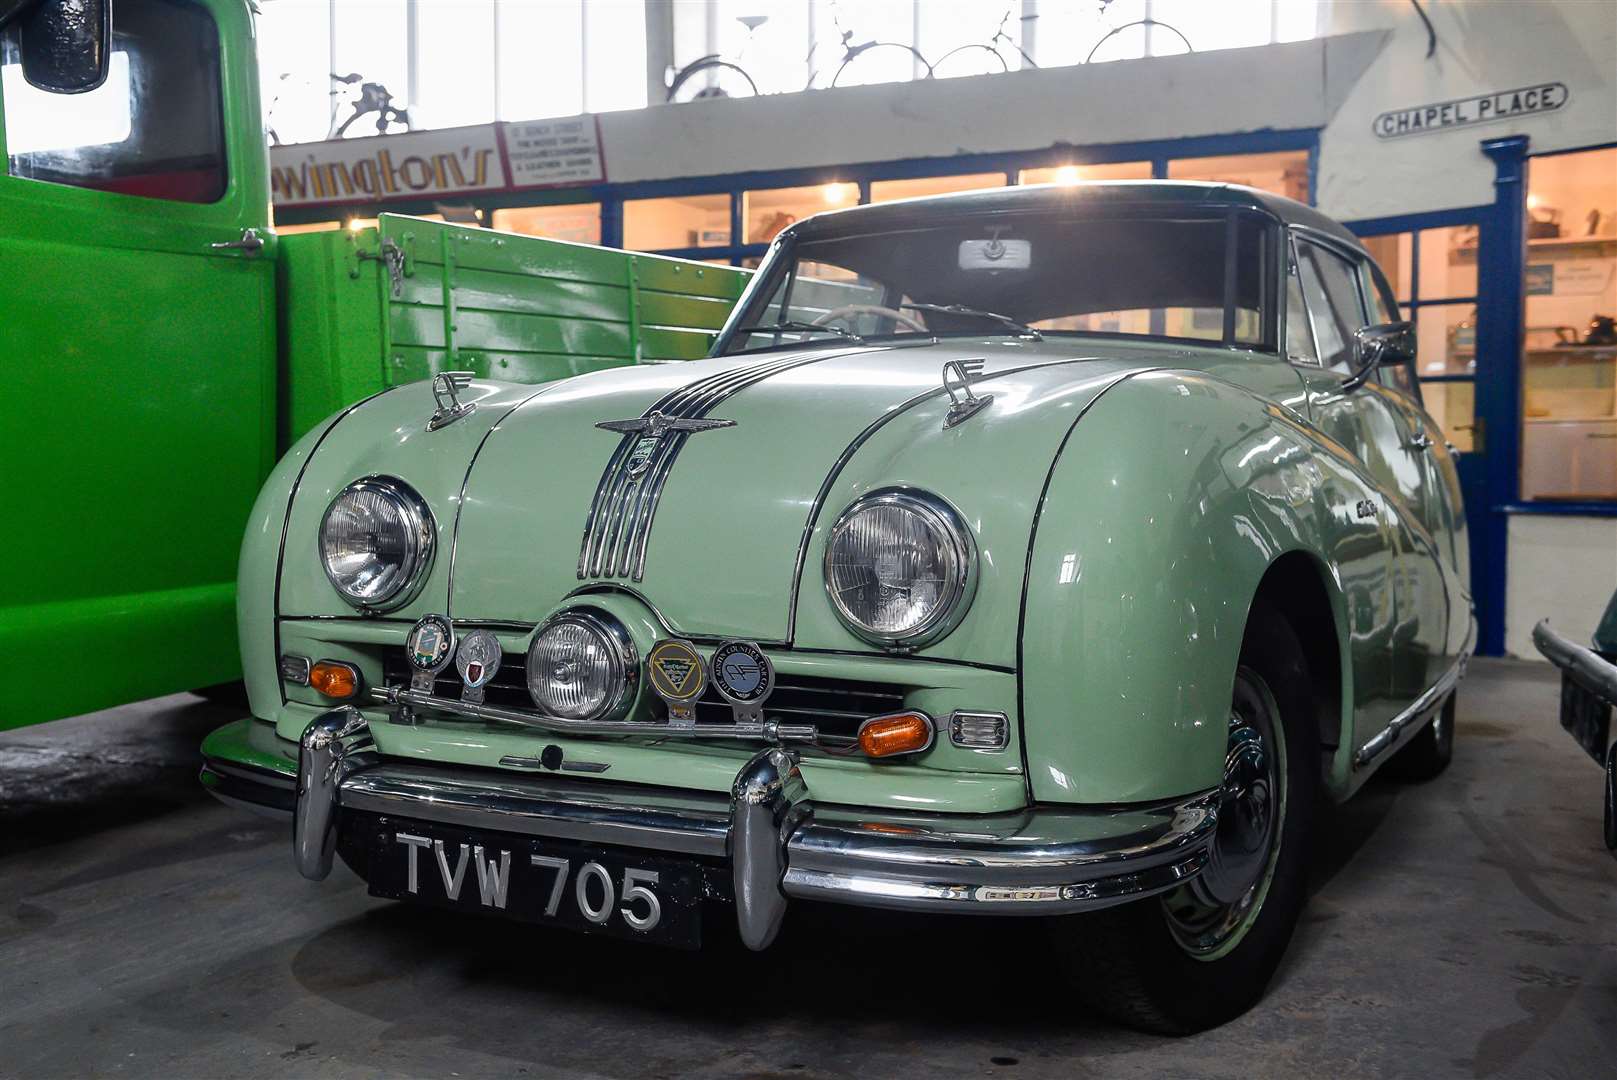 New to view: An Austin A90 Atlantic. Designed for the North American market this was a rare sight on British roads. Dover Transport Museum was gifted the car